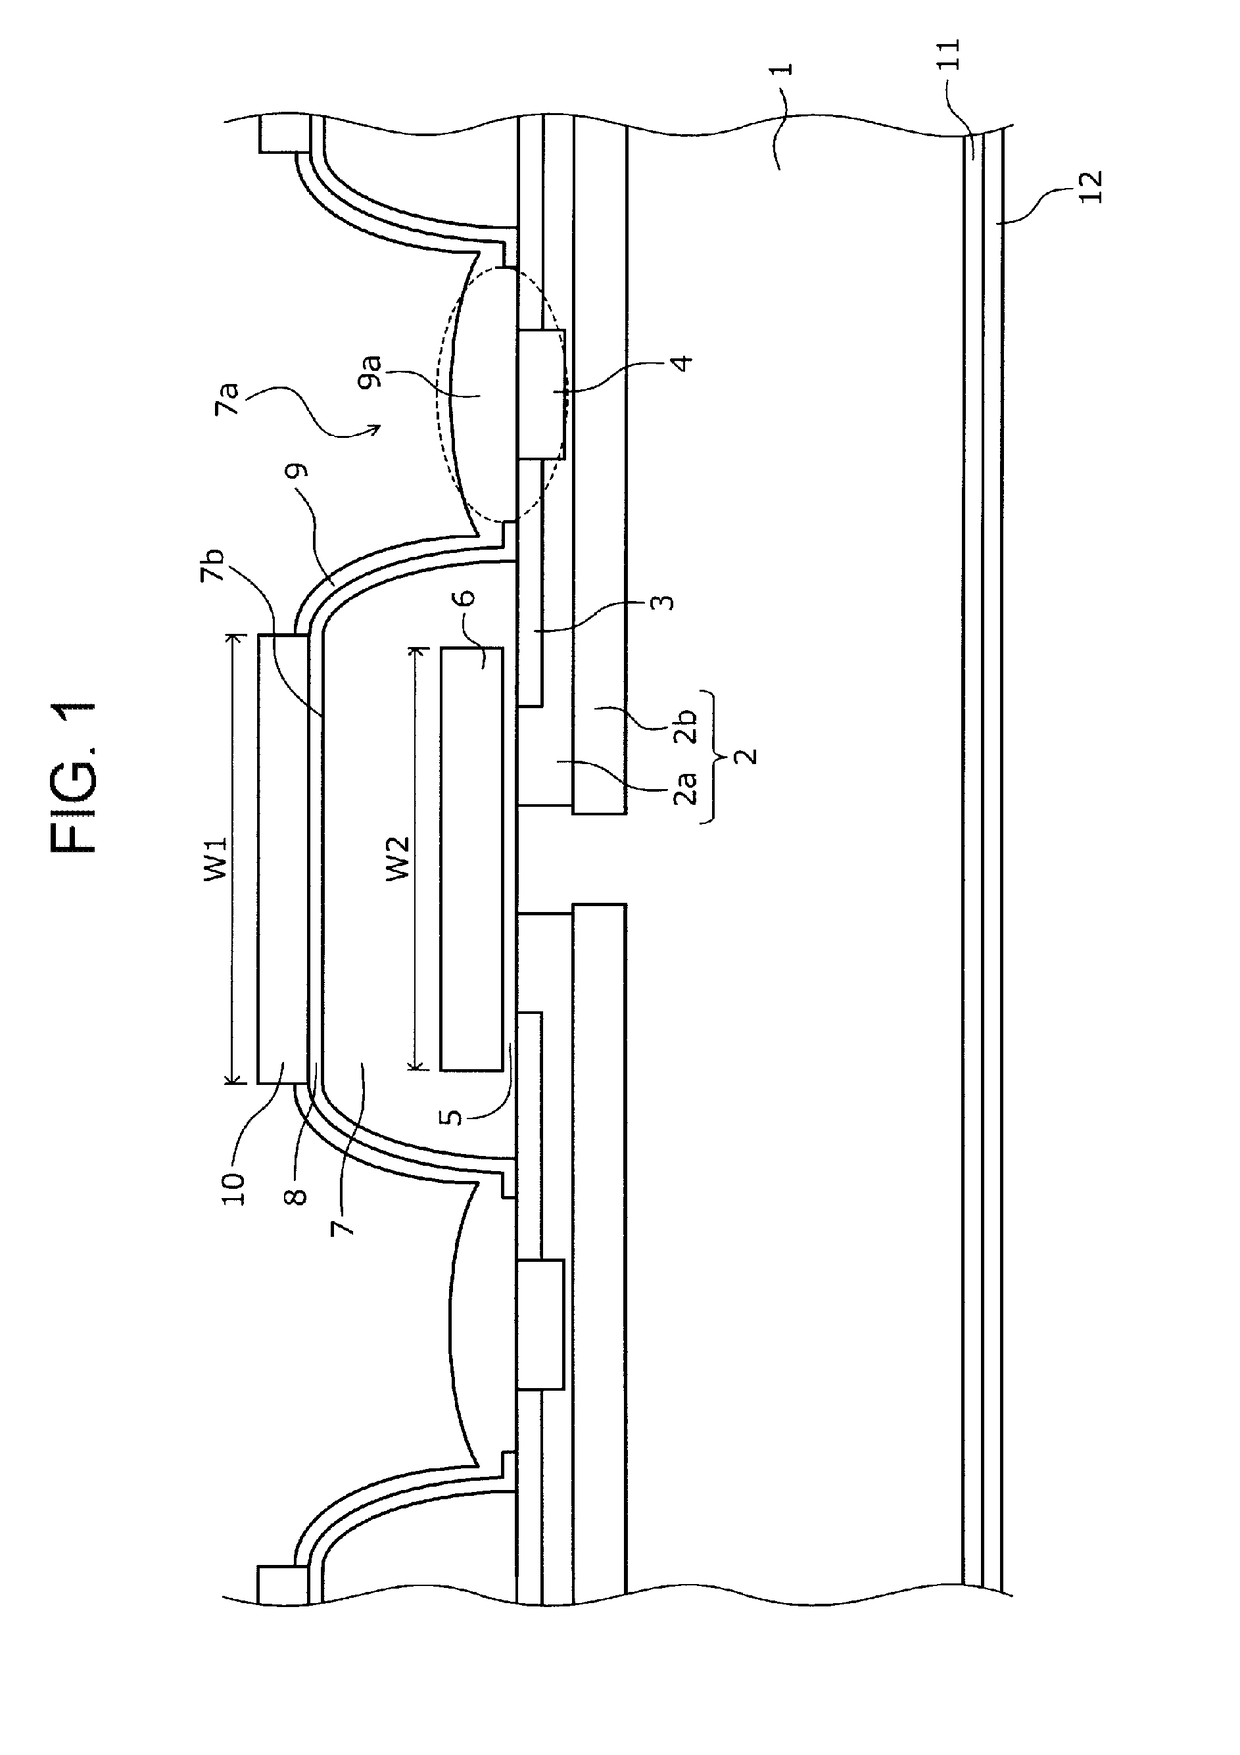 Method for manufacturing a semiconductor device by exposing, to a hydrogen plasma atmosphere, a semiconductor substrate